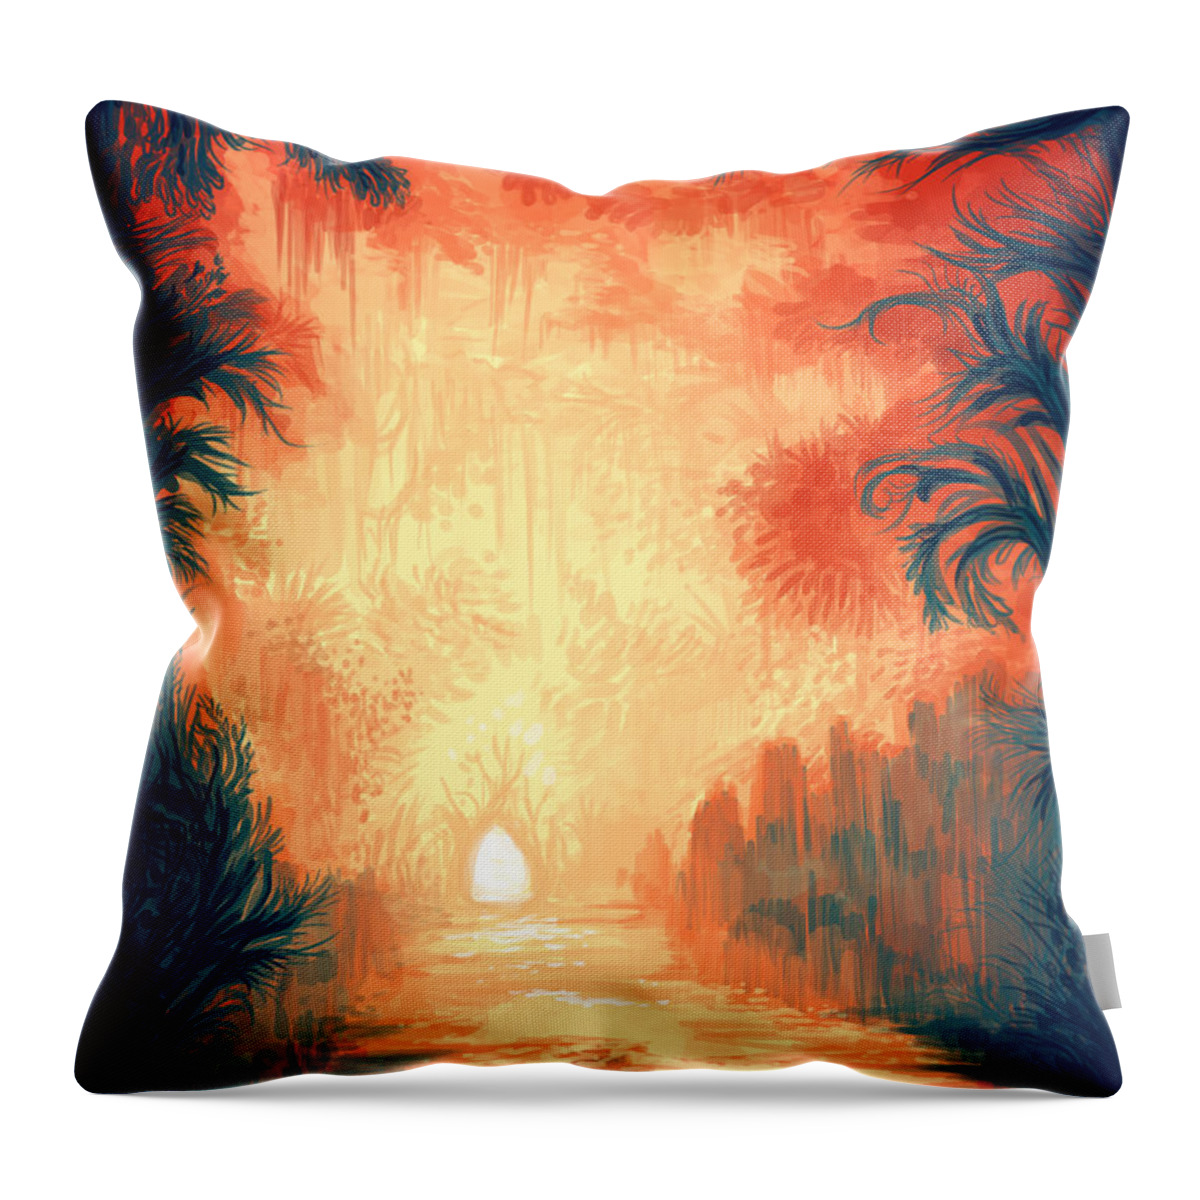 Outdoors Throw Pillow featuring the digital art Walk Away by Illustrations By Annemarie Rysz